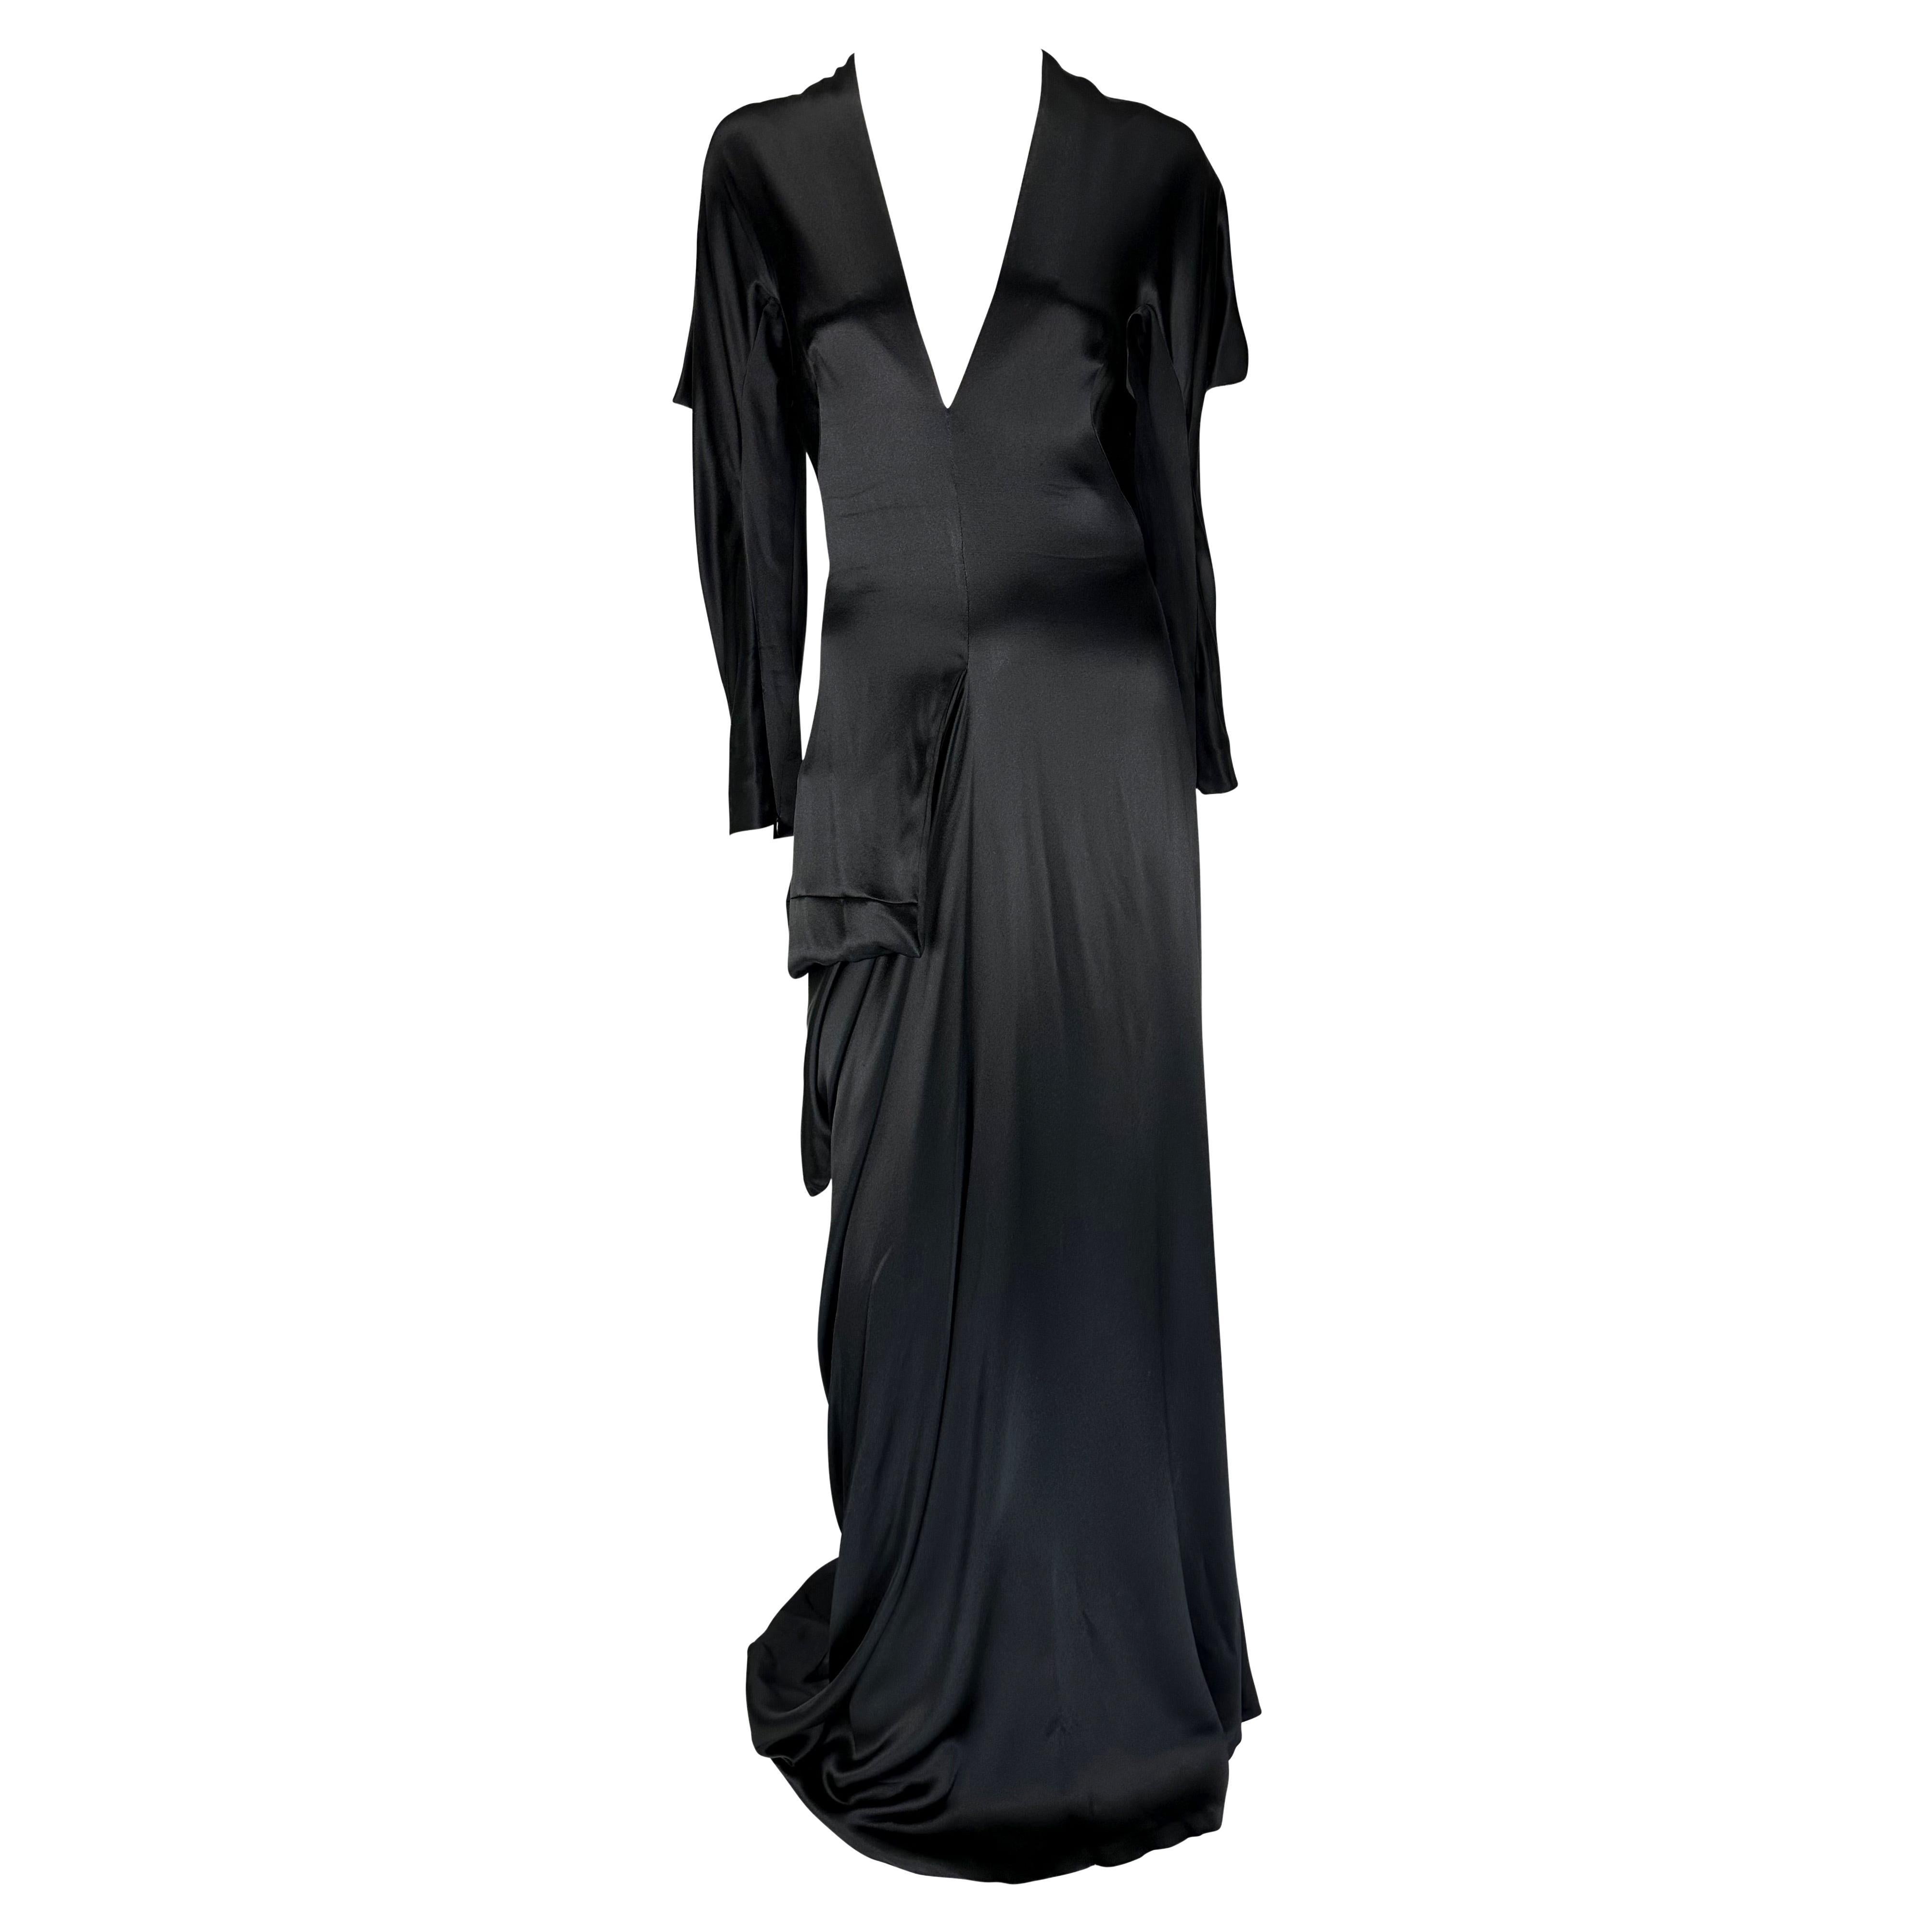 Presenting an incredible black silk satin Alexander McQueen gown. From the Fall/Winter 2010 